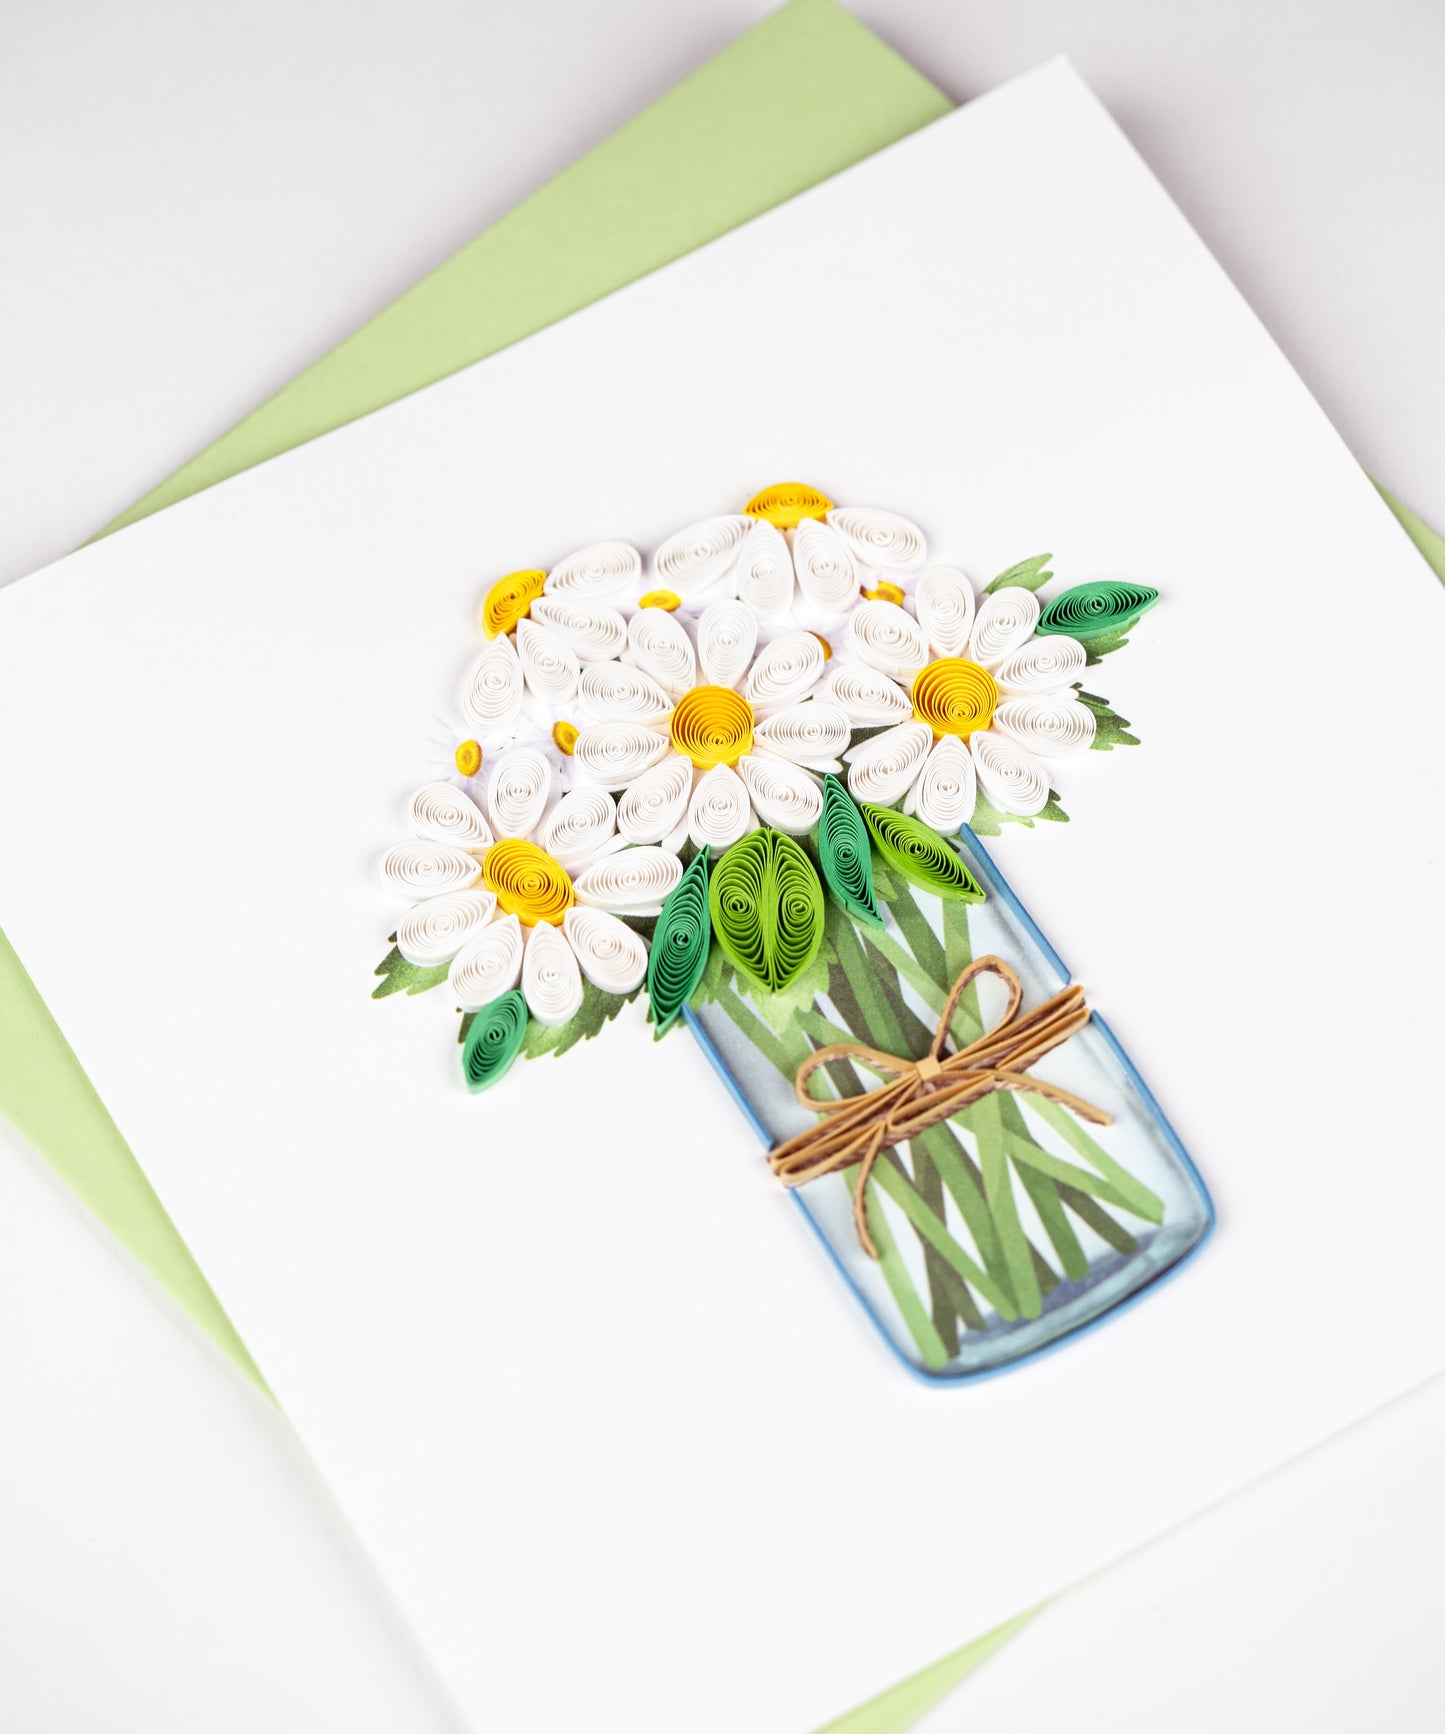 Quilling Jar Of Daises Daisy Dreams Come True! Hand-Finished Art Greeting Card